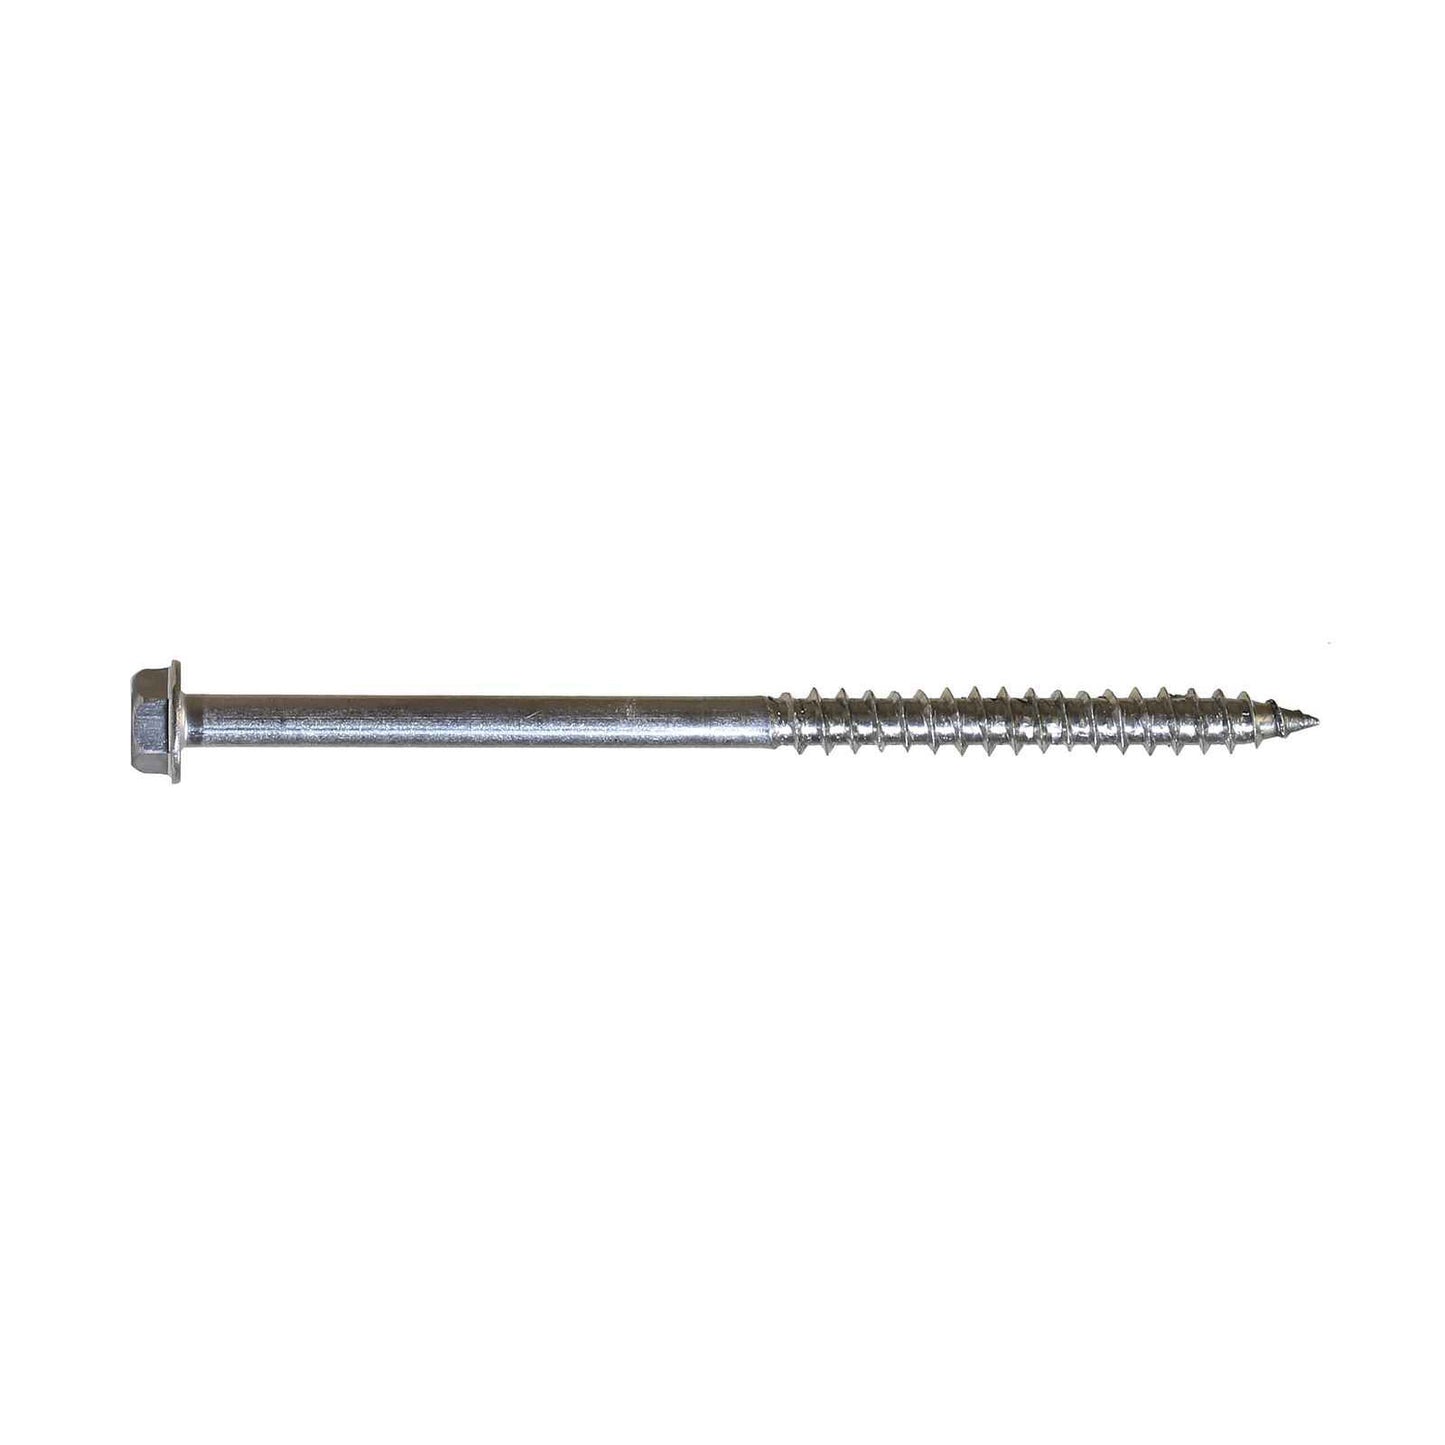 0.188" x 6" Strong-Tie SDWH19600SS-R100 Timber-Hex Screw - 316 Stainless Steel